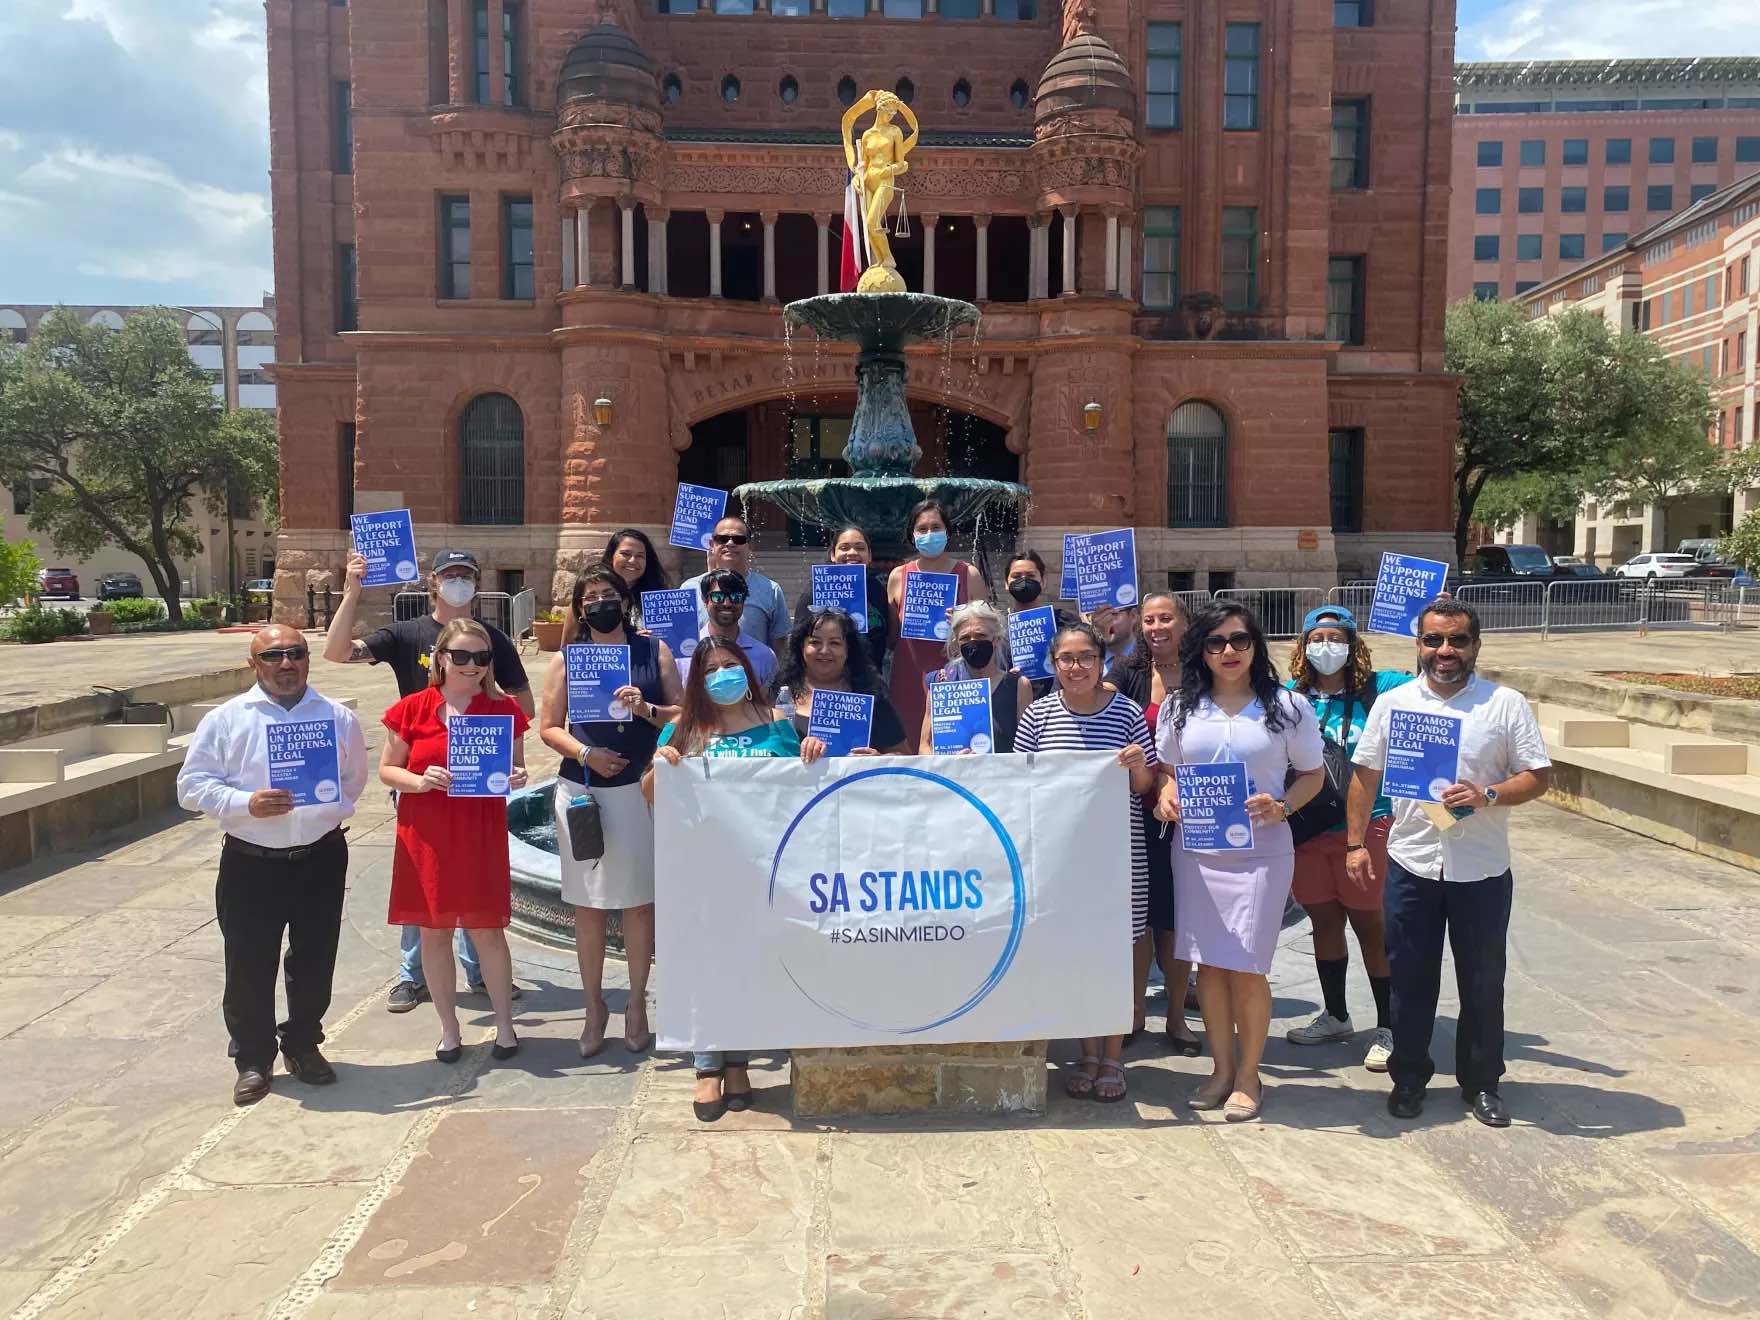 A photo of a group of people holding a sign saying "SA STANDS" in Bexar County, Texas after the creation of an immigrant legal defense fund.